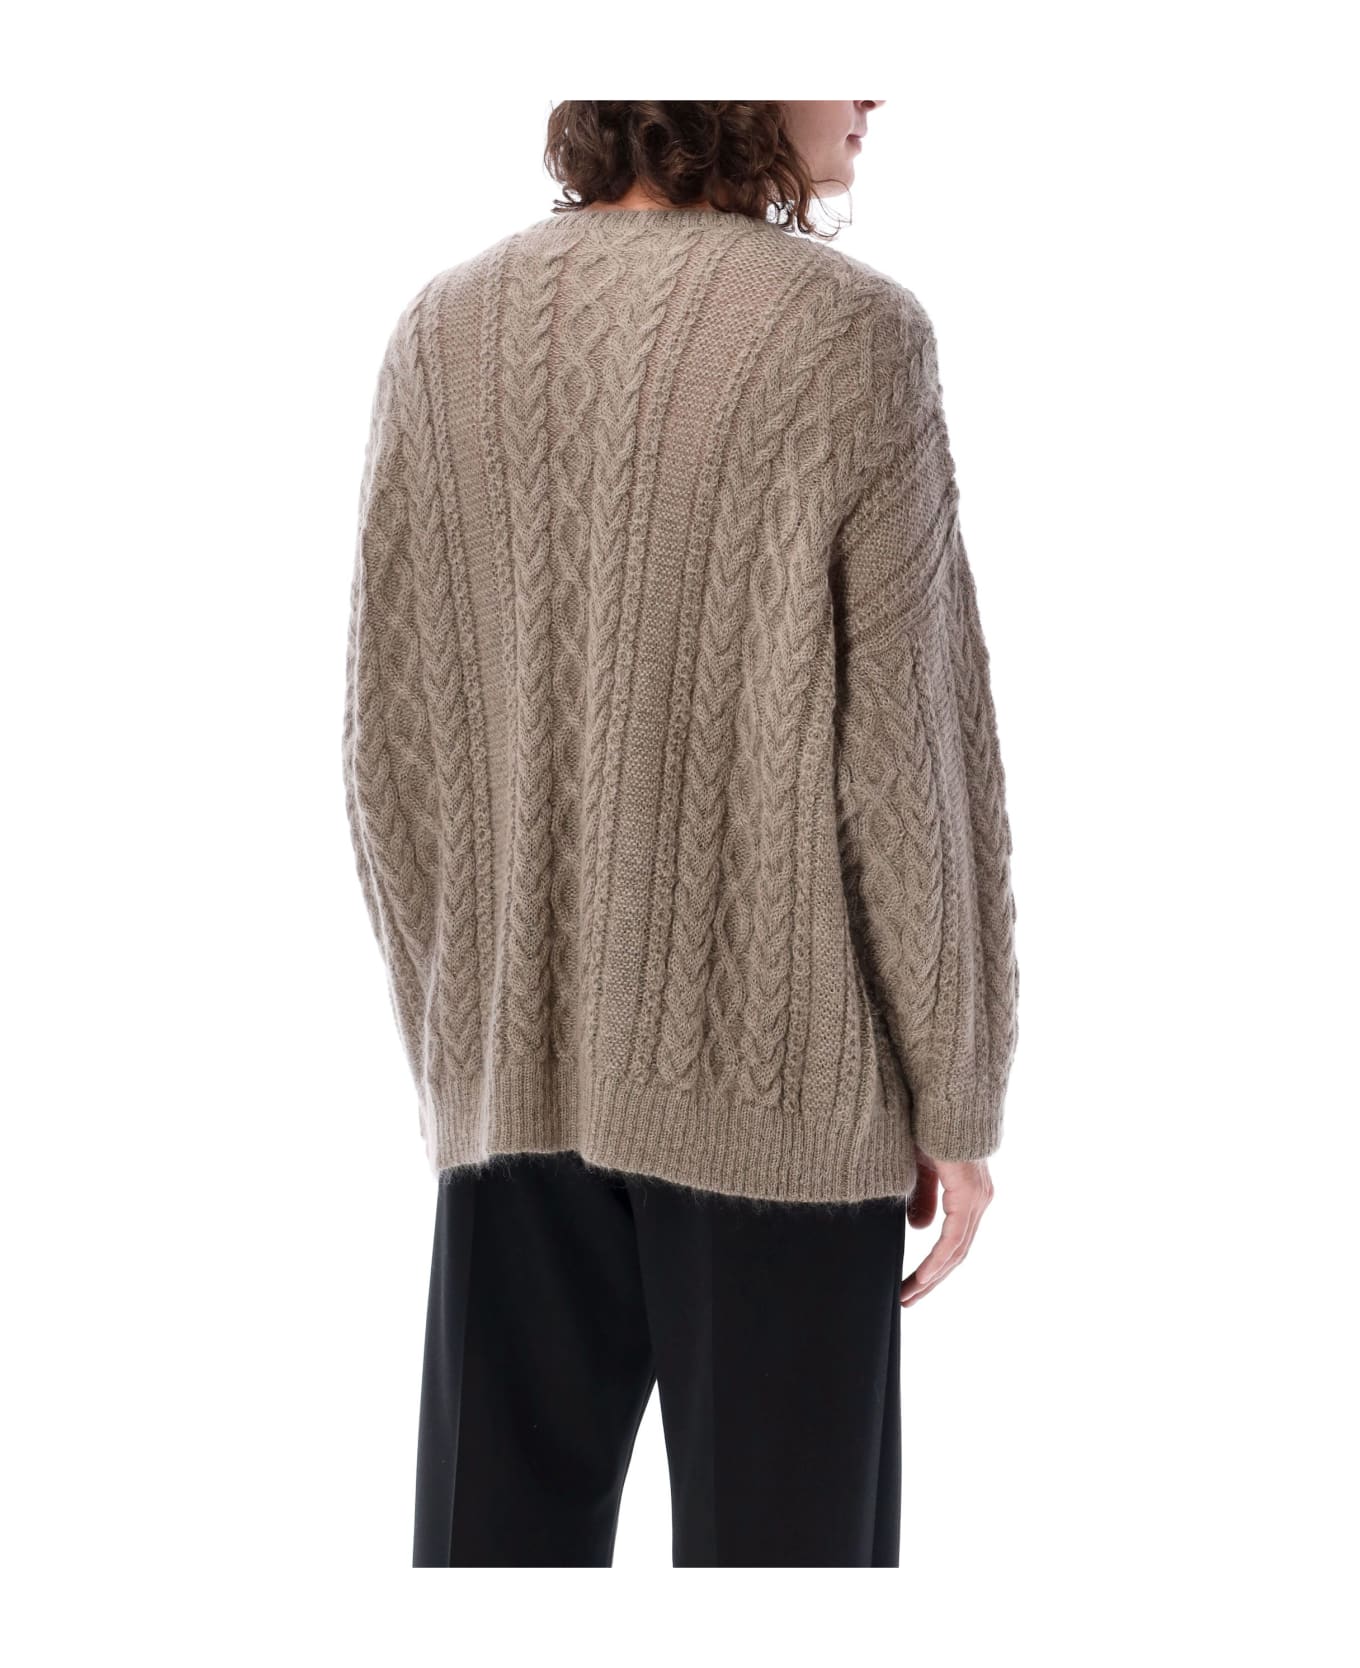 Undercover Jun Takahashi Cable Knit Sweater - GREY BEIGE ニットウェア